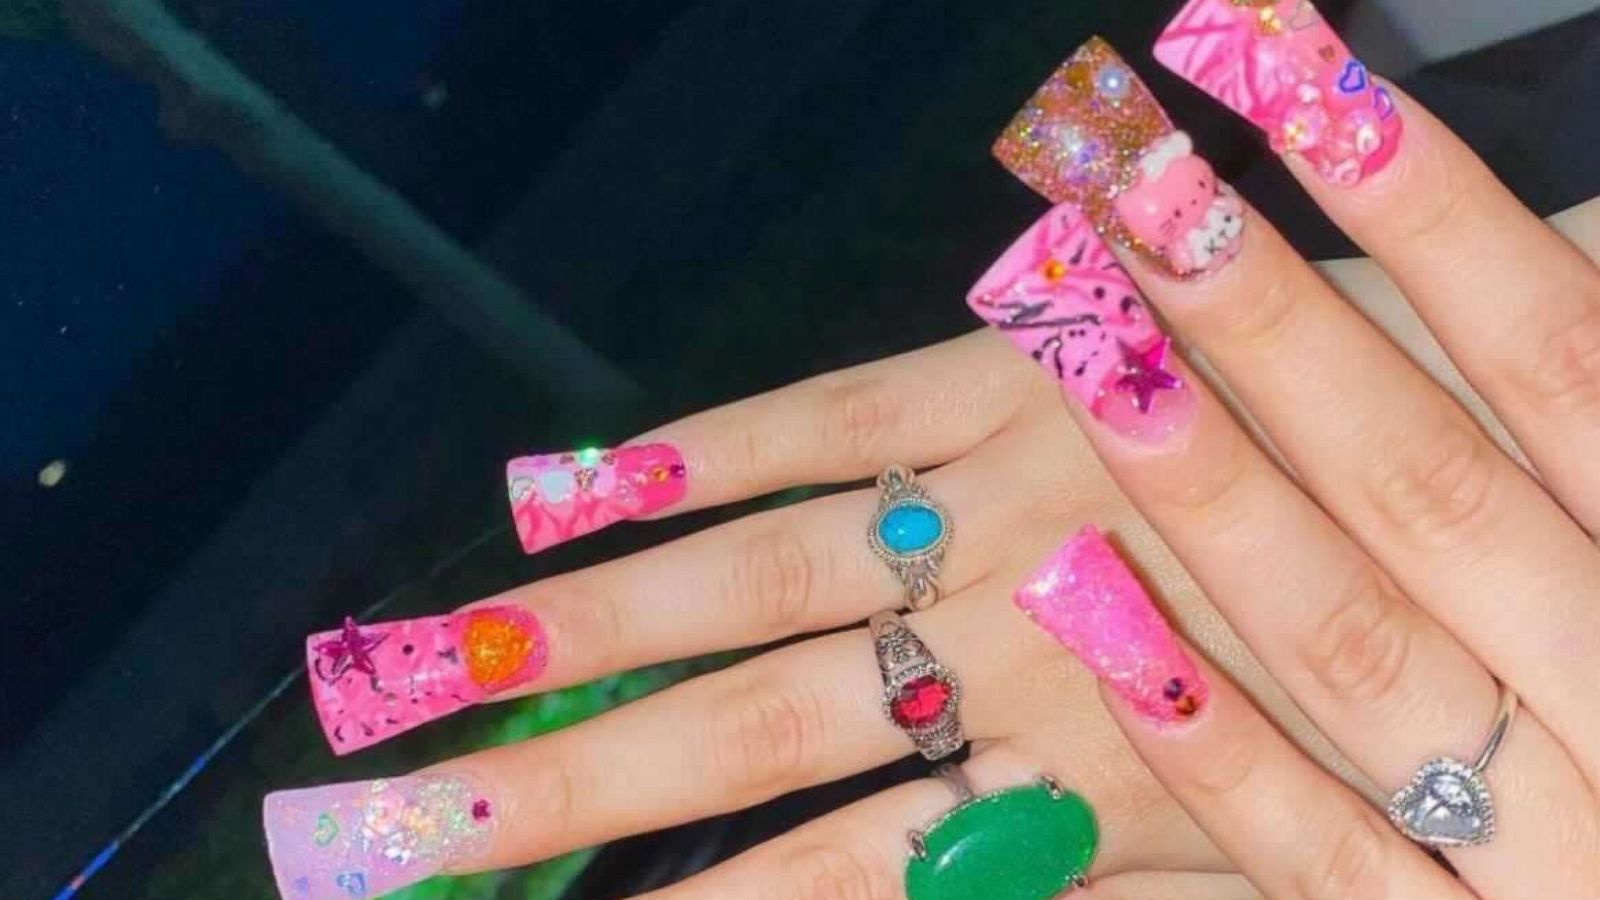 Duck nails are having a moment, and the internet has mixed feelings - Good  Morning America